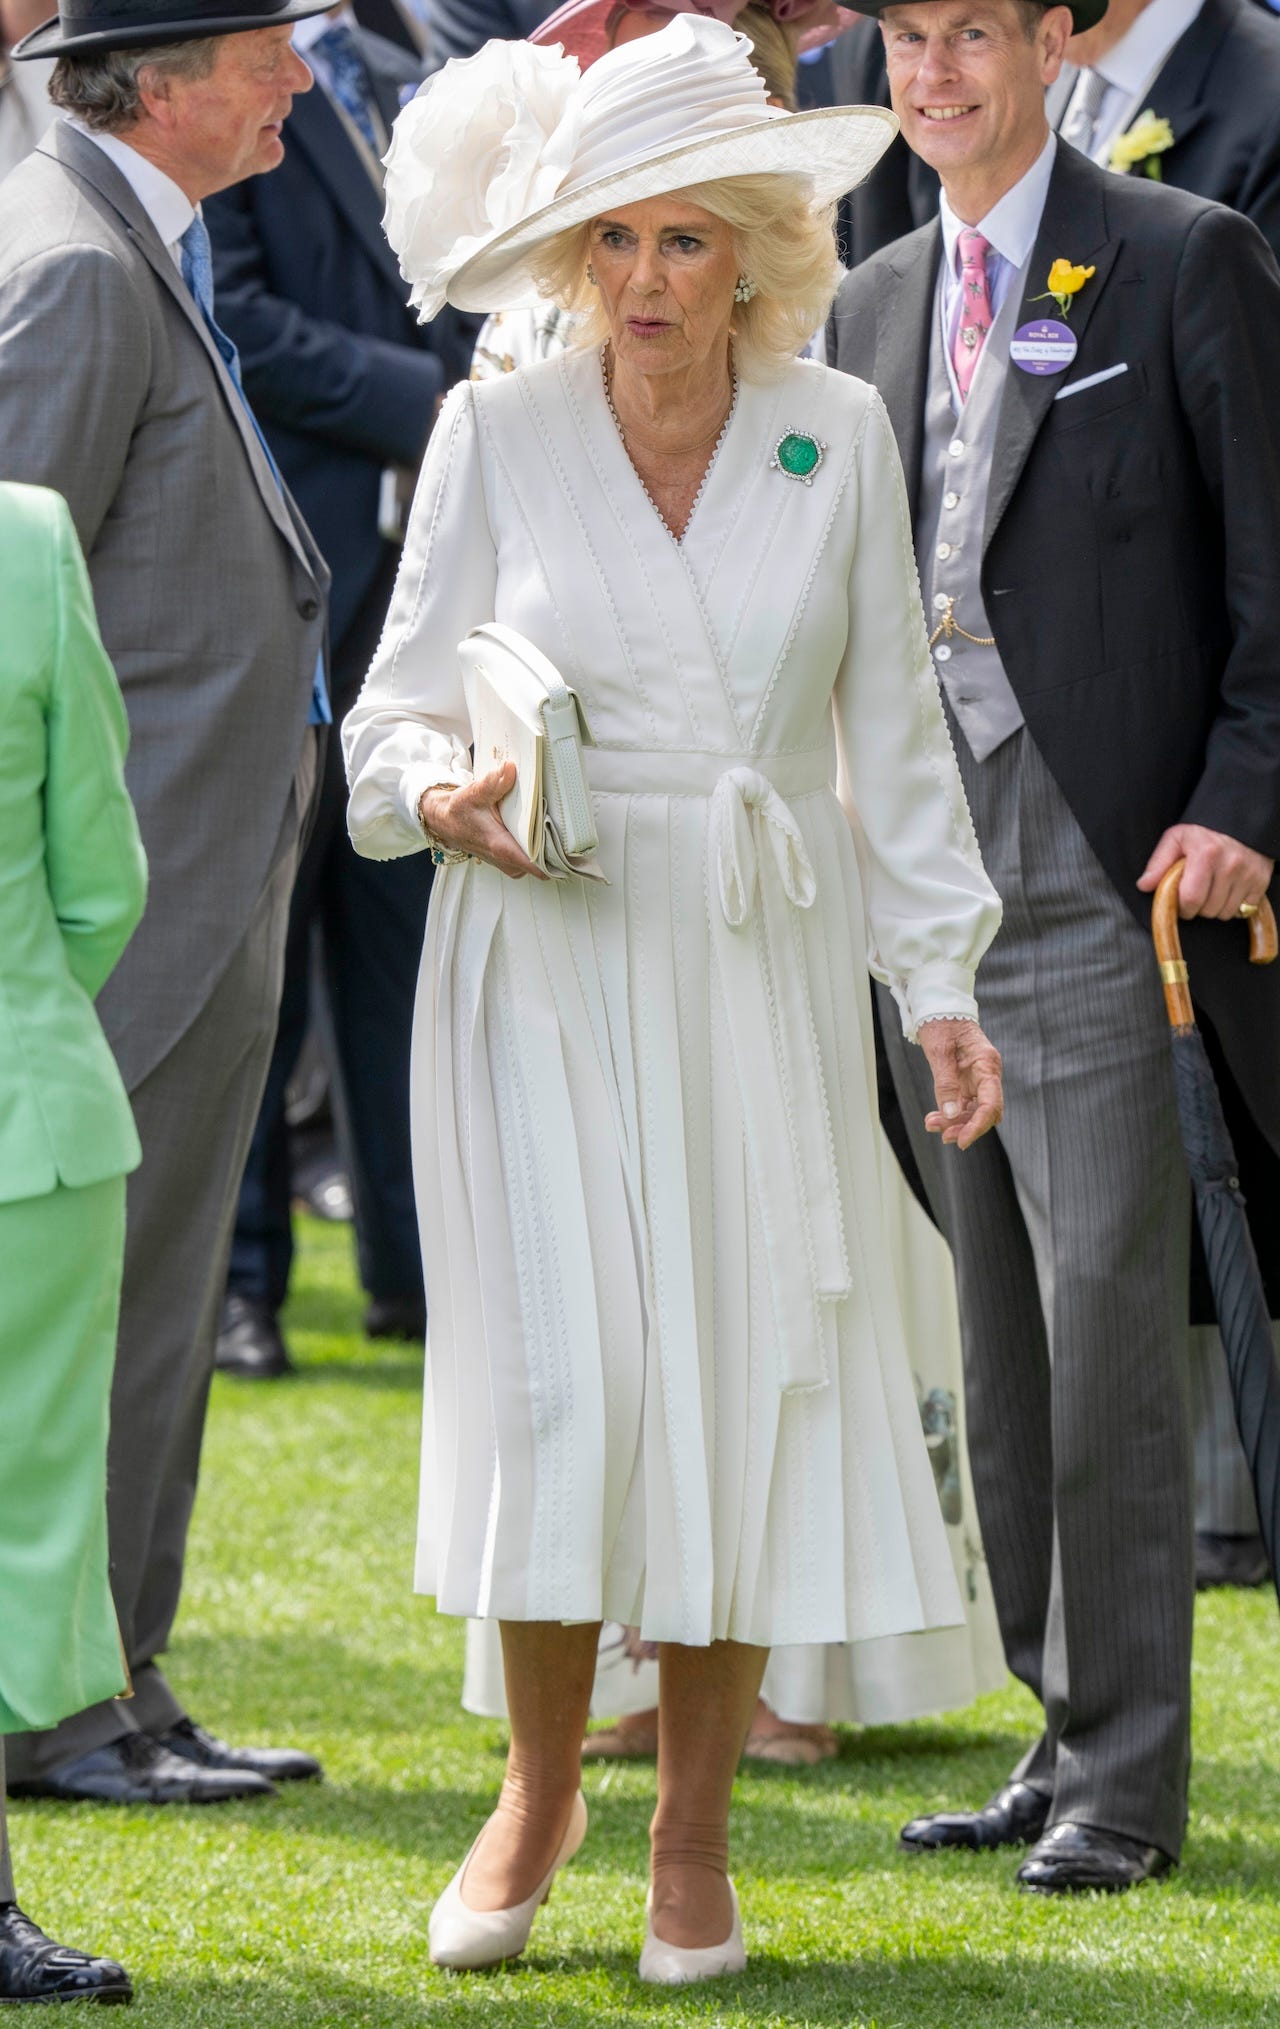 <p>On Thursday, Camilla chose her most summery attire of the week: a white long-sleeved wrap dress and a coordinating white hat with a large floral appliqué.</p><p>She paired her dress with a matching handbag and added a pop of color with the Ladies of India brooch, a piece of emerald-and-diamond jewelry gifted to Queen Mary in the early 1900s, according to <a href="https://www.thecourtjeweller.com/2022/03/the-queen-dazzles-in-diamonds-and-a-major-emerald.html">the Court Jeweller</a>.</p>